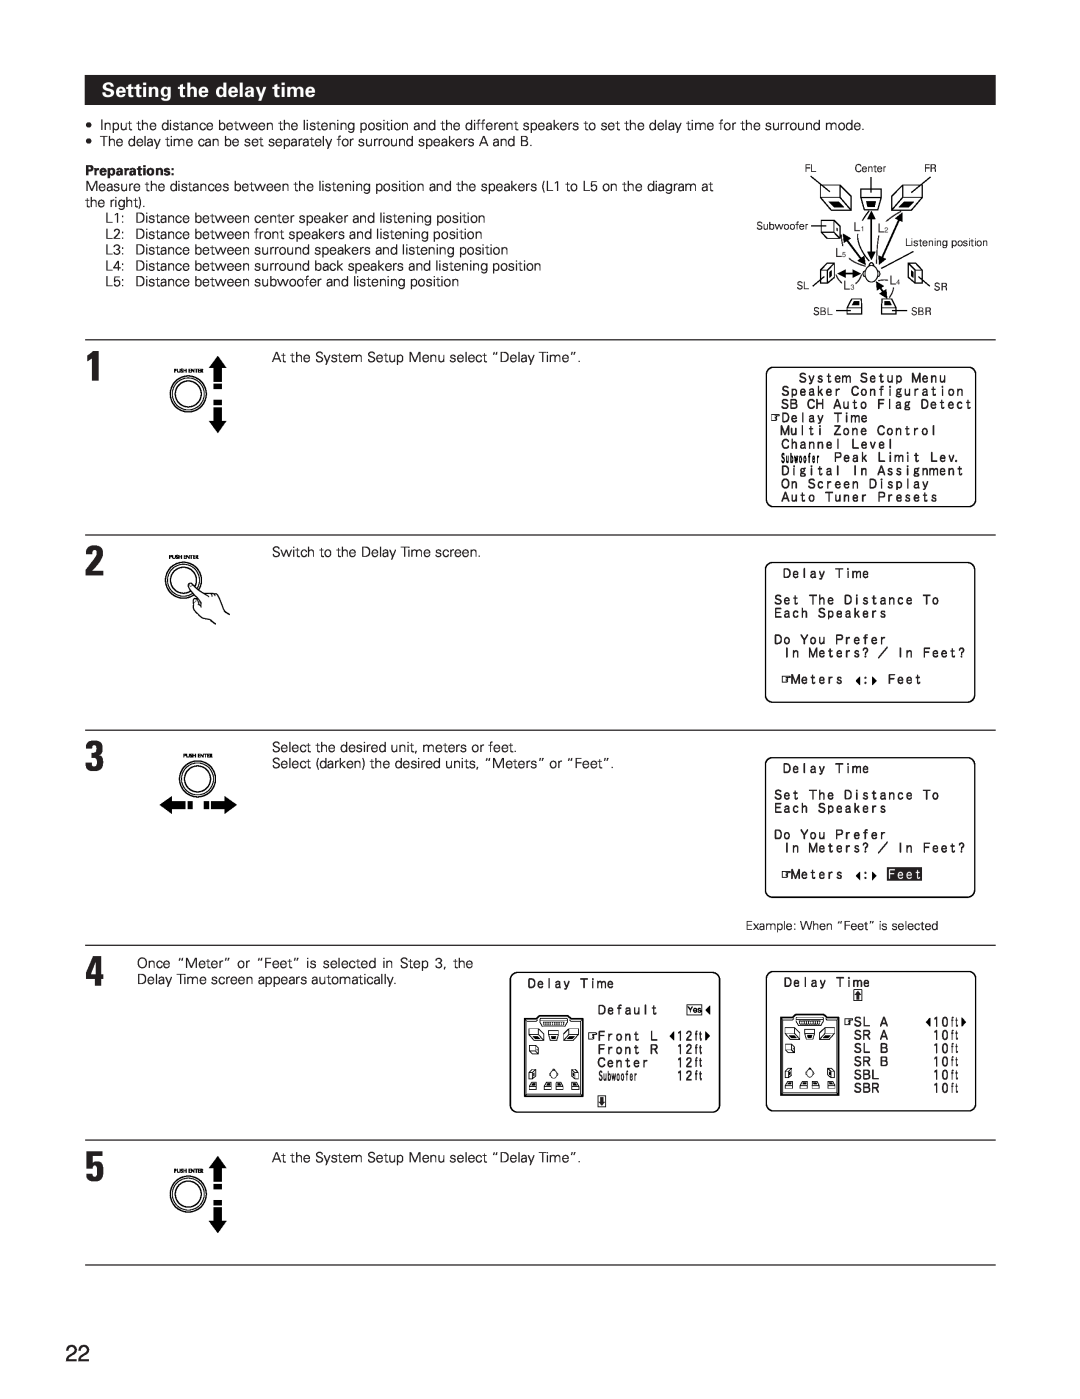 Denon AVR-5800 operating instructions Setting the delay time, Preparations 